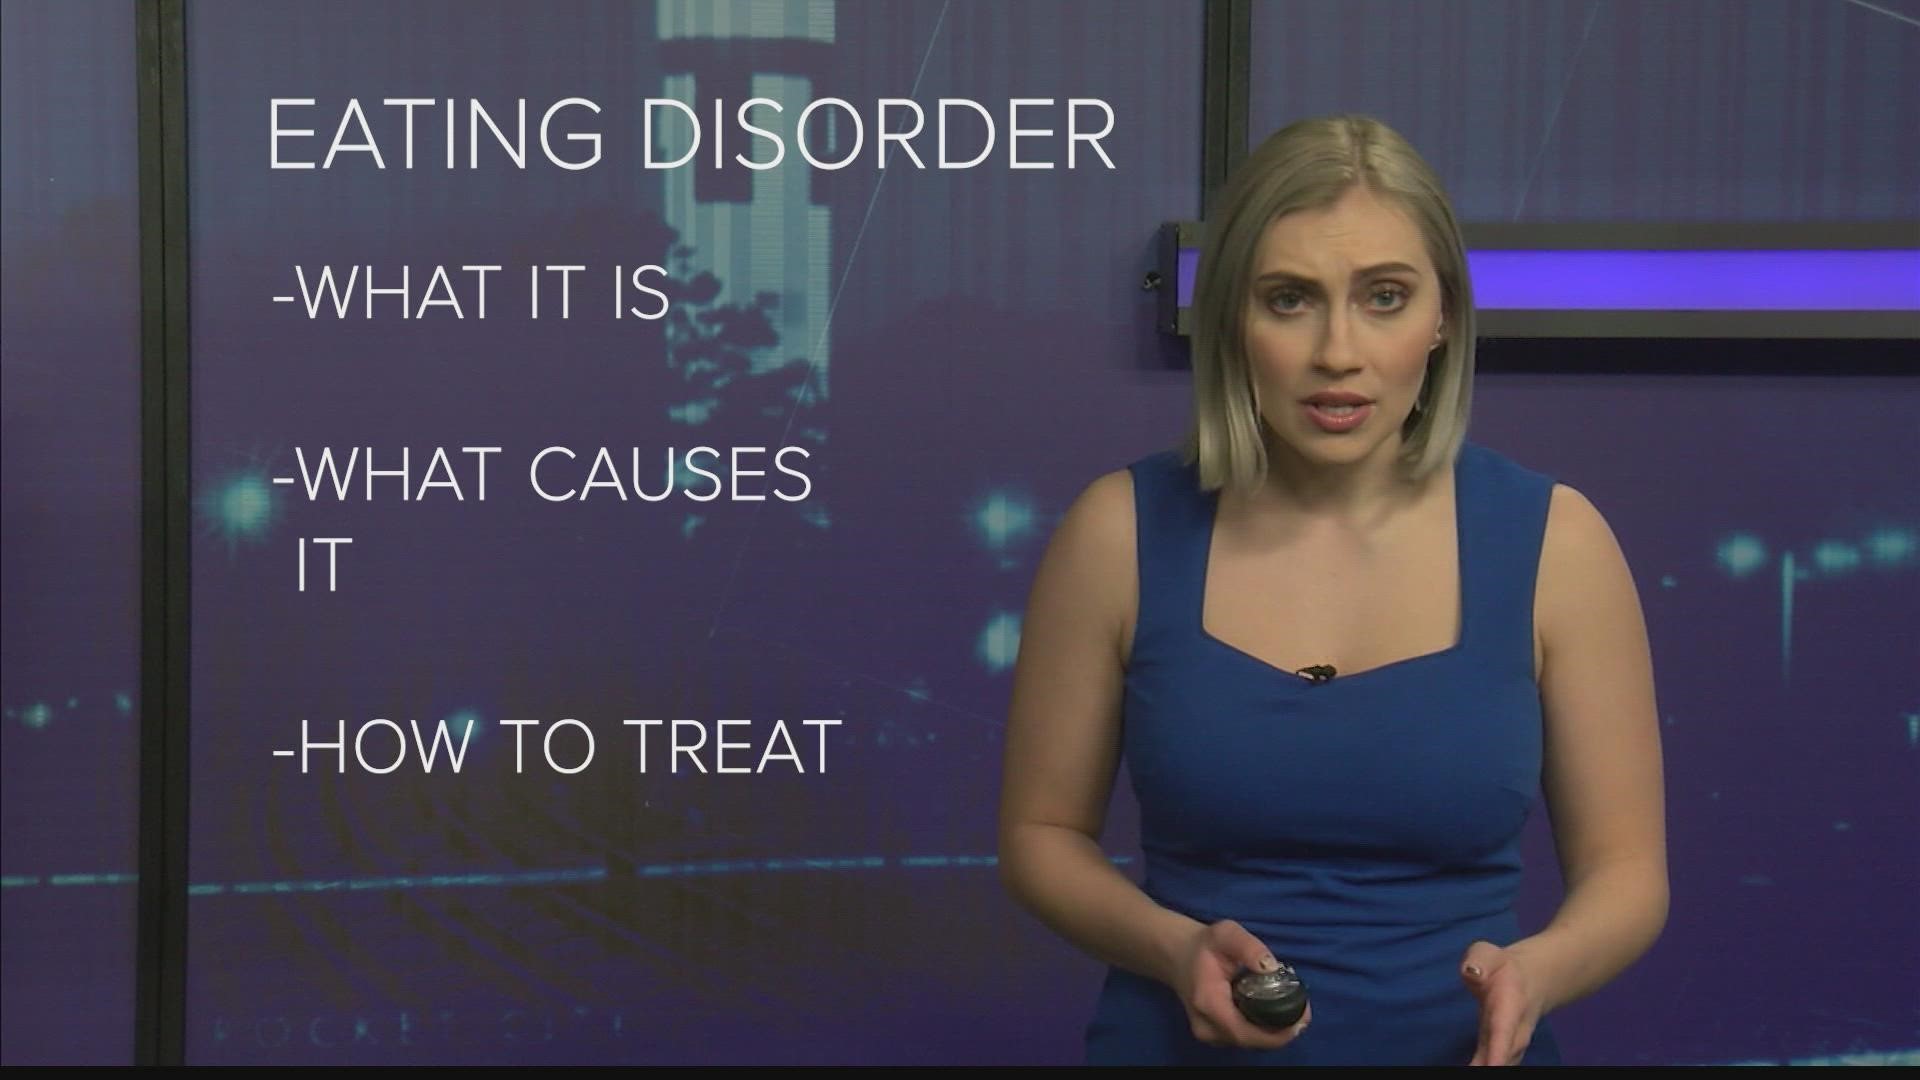 Eating disorders can be genetic and people's environments can also put them at a higher risk of having one.